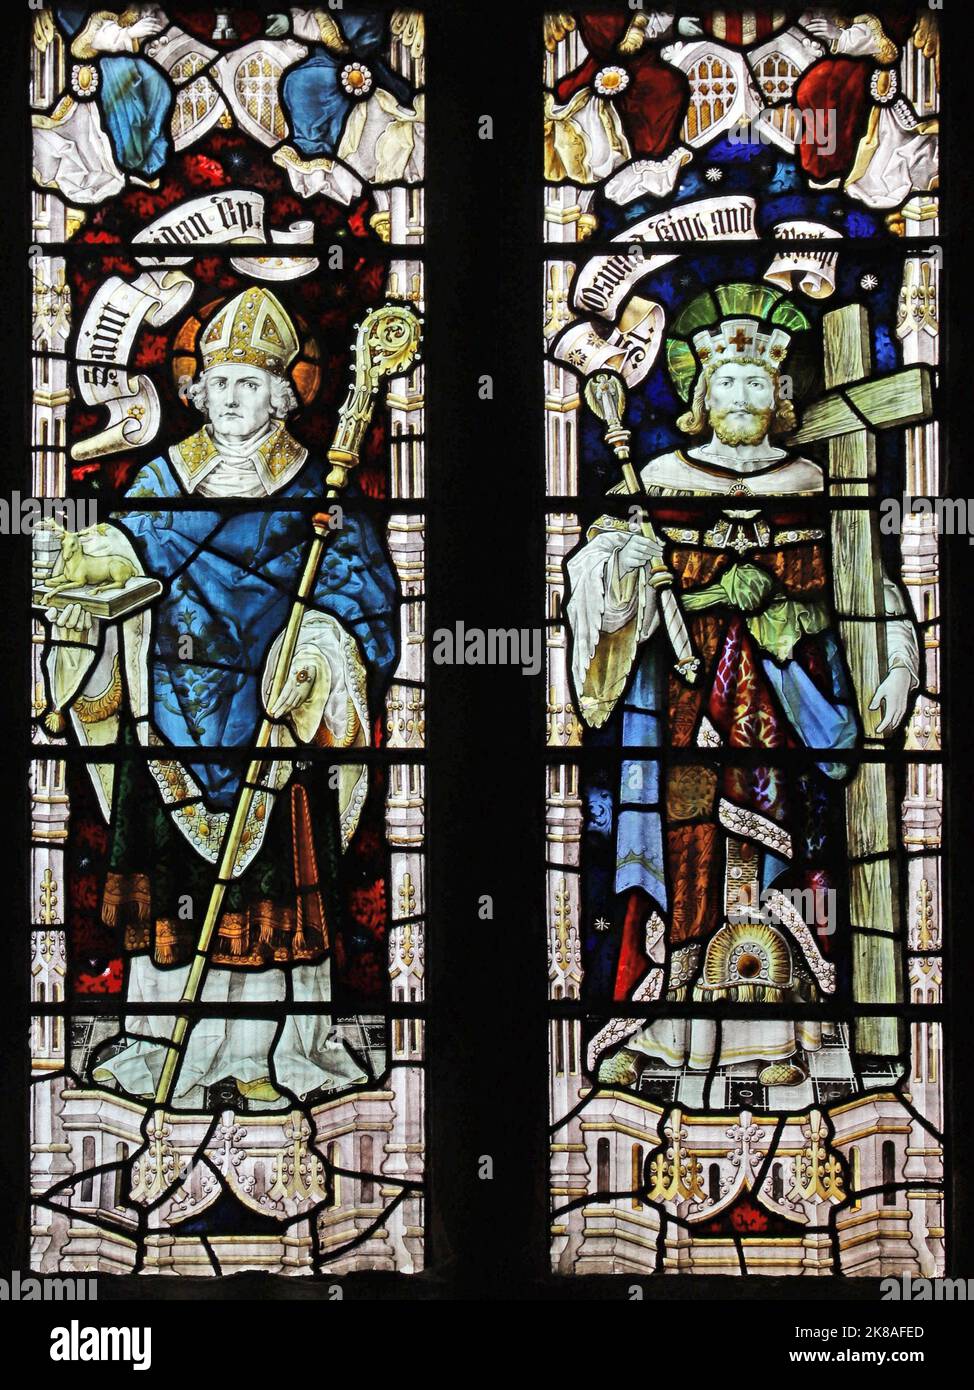 Stained glass window by Percy Bacon & Brothers depicting Saints Aidan & Oswald, St Chad's Church, Bensham, Gateshead Stock Photo